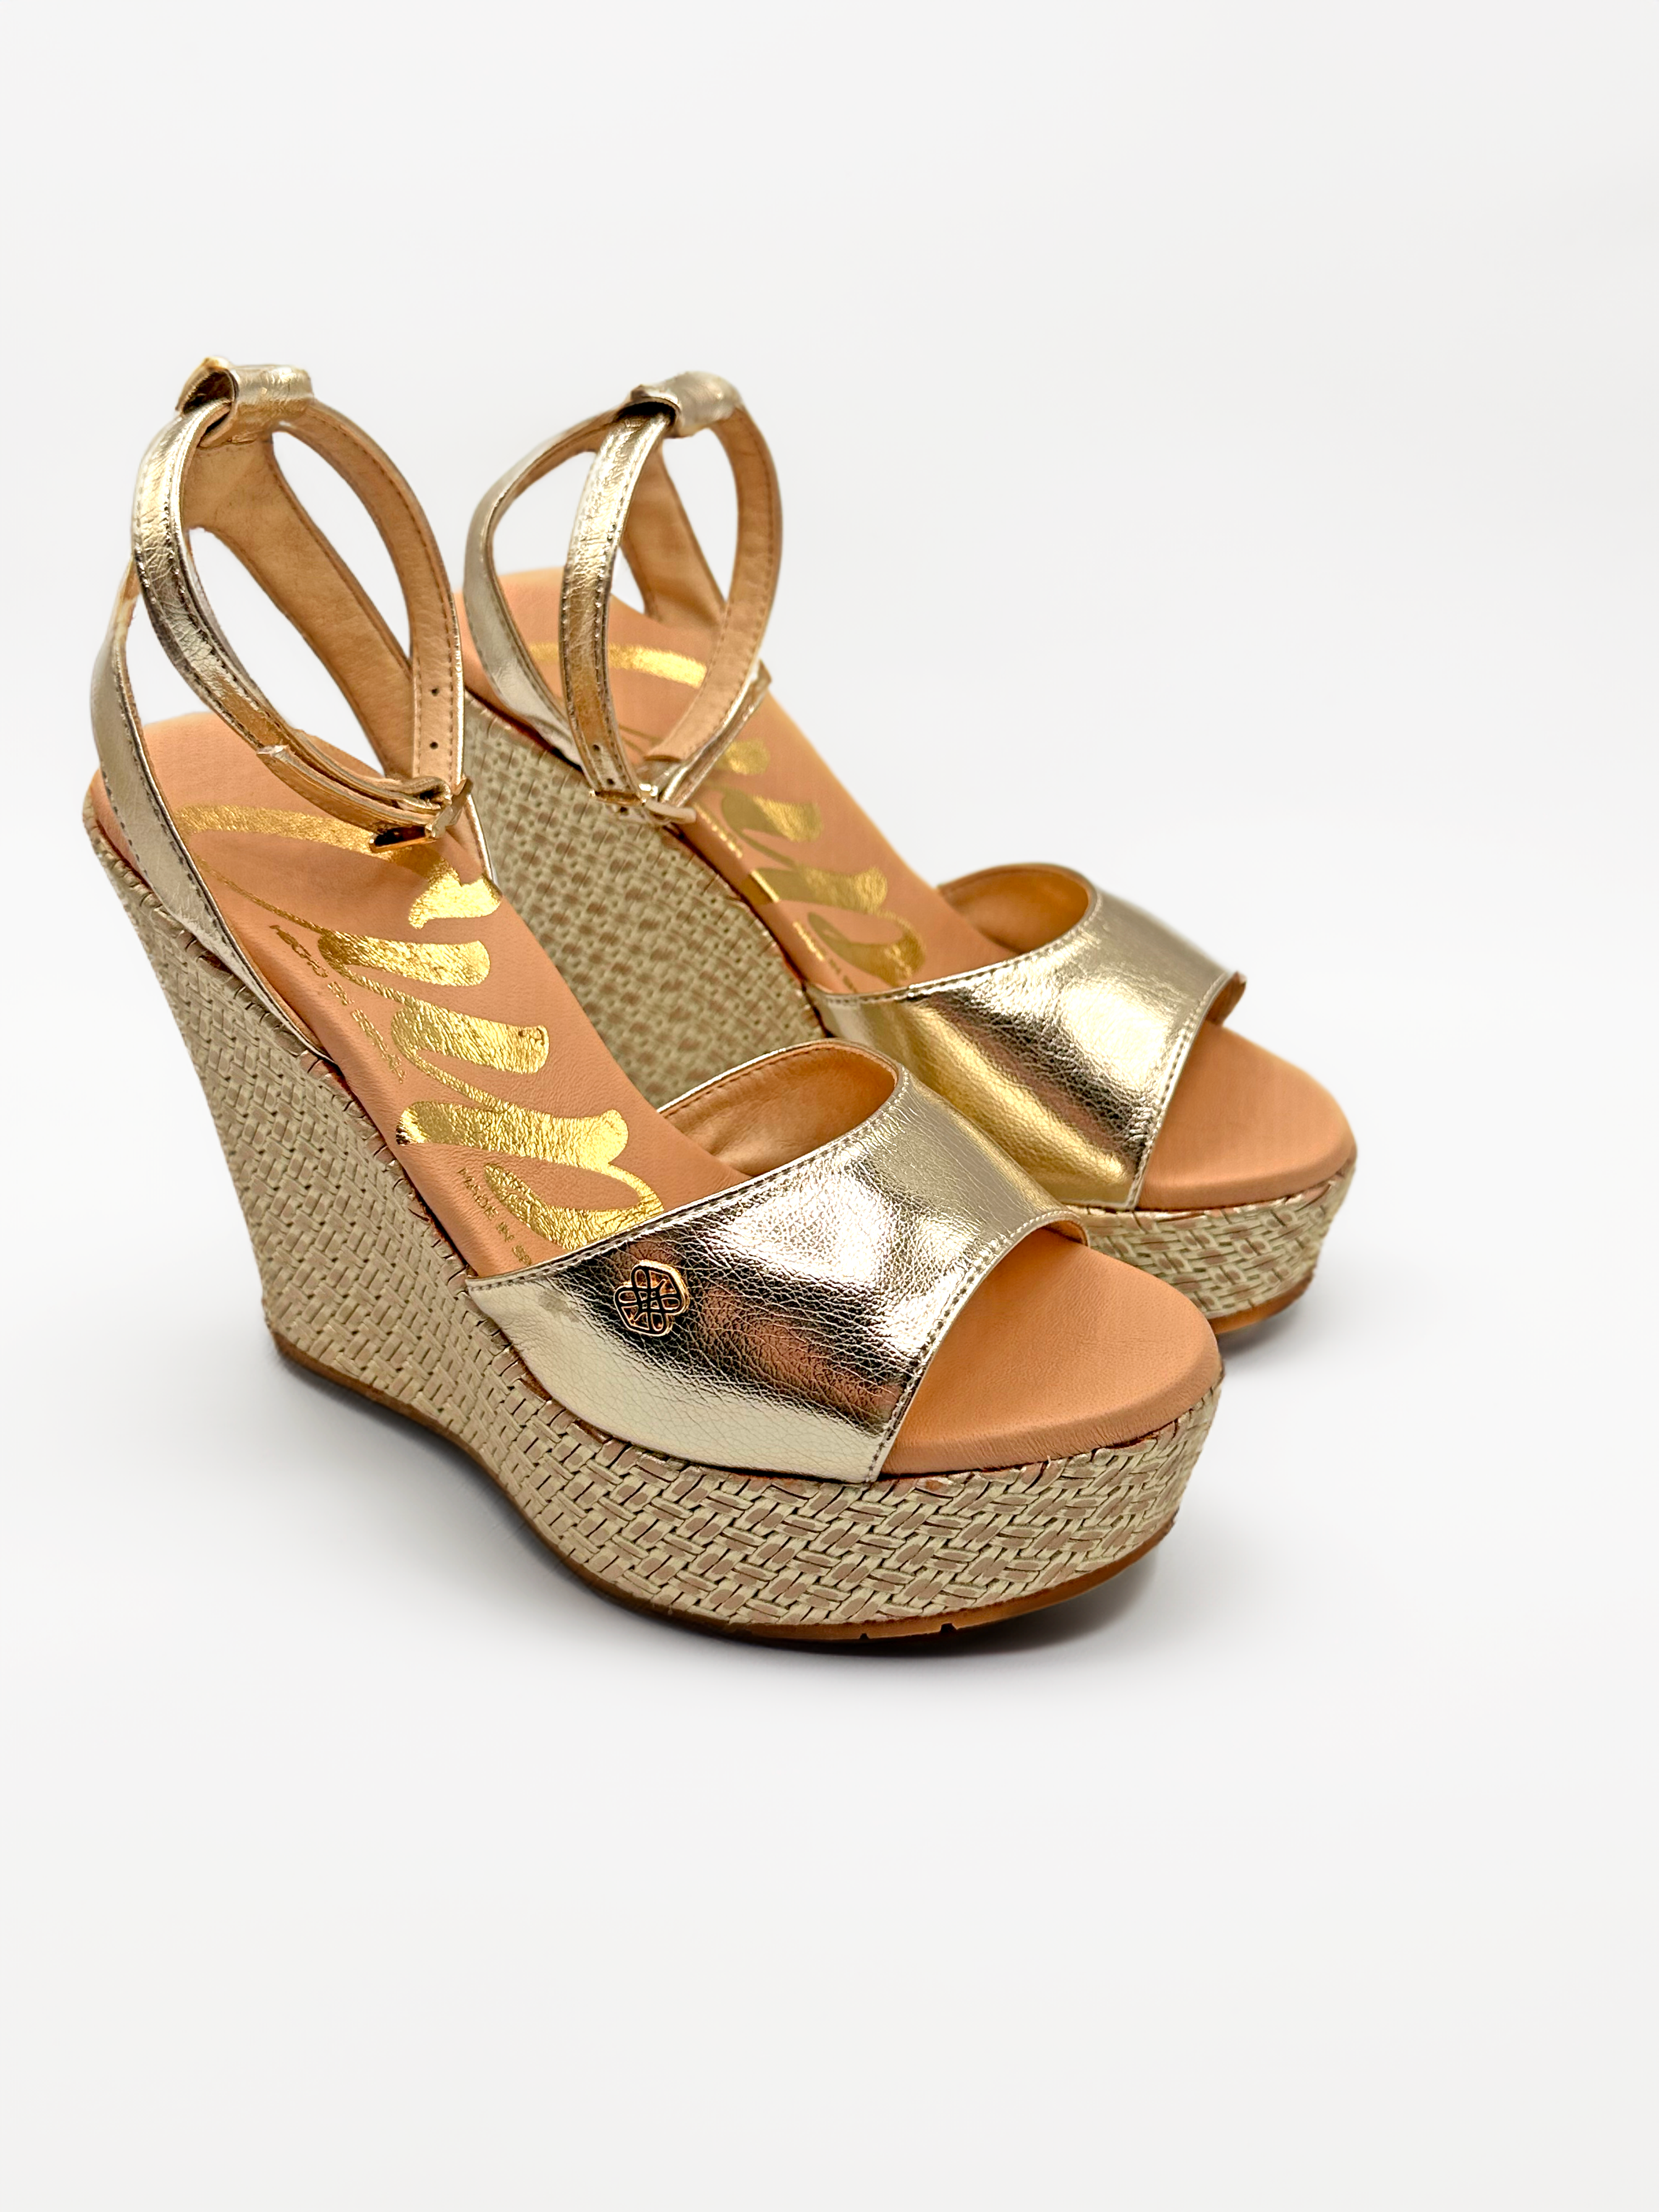 NUR ITALY Cuple Ankle Strap Leather Wedge Sandal, main color, GOLD